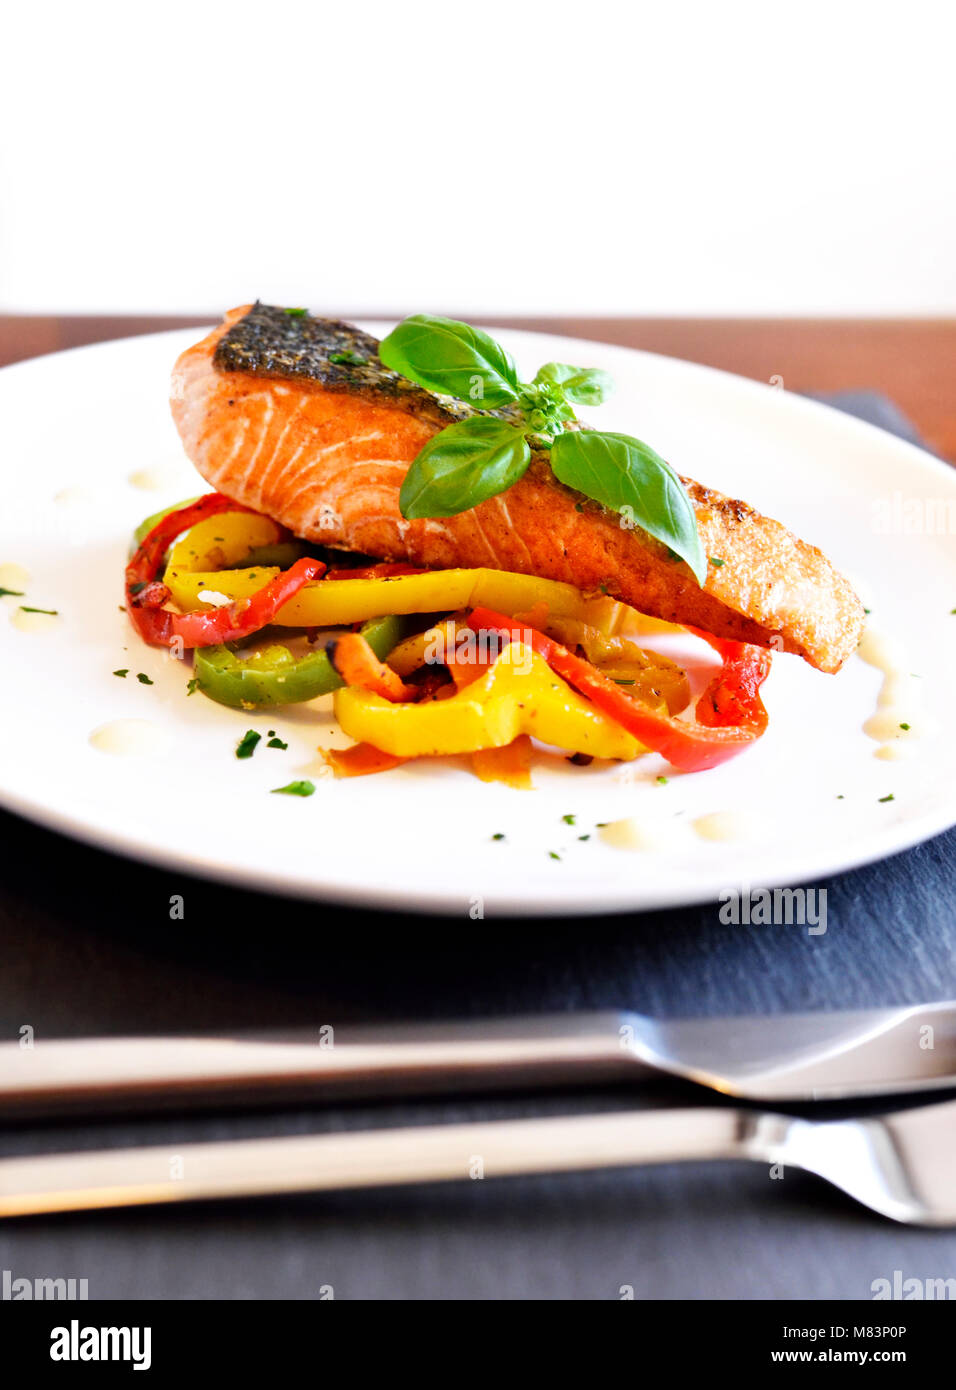 Delicious salmon filet and red bell pepper vegetables on a white plate. Healthy meal, decorated with basil leaf. Dinner scene with white wine and fish. Stock Photo